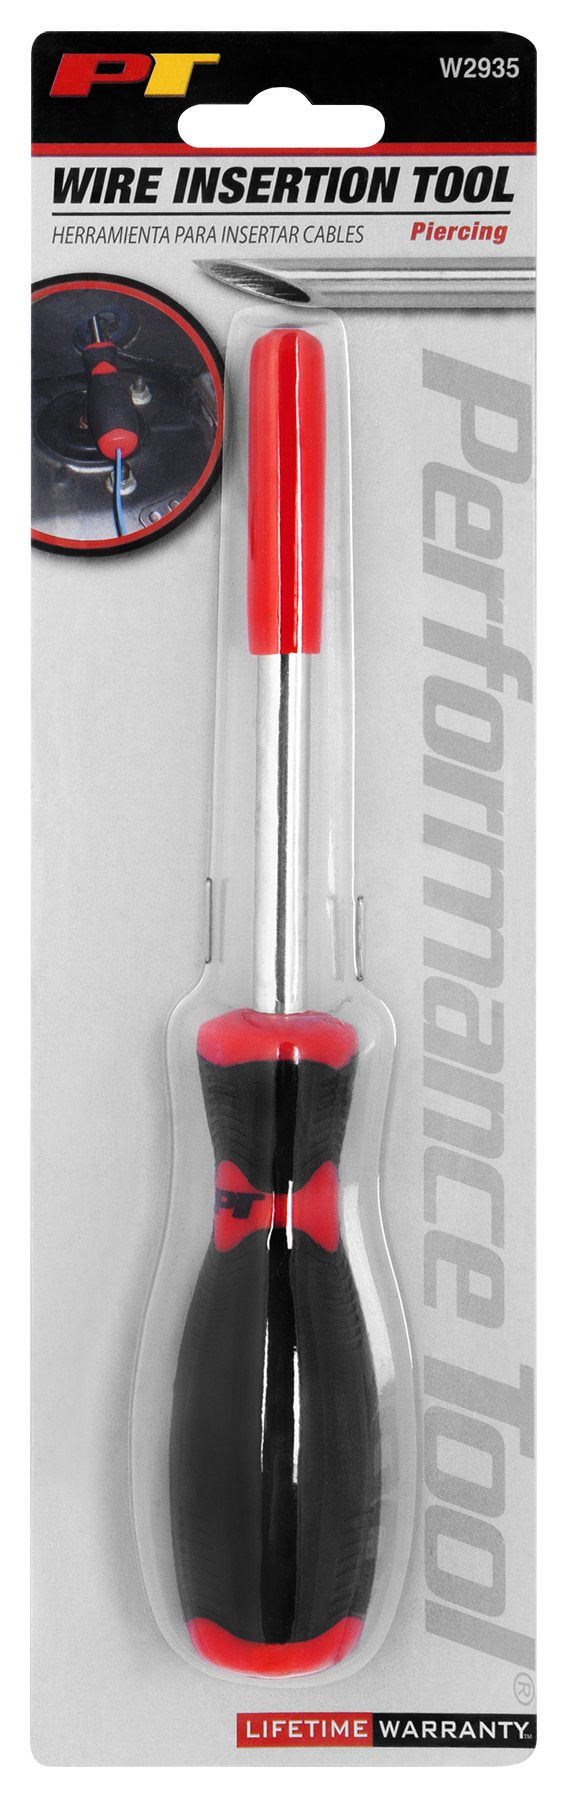 Performance Tool W2935 Wire Insertion Tool - Piercing Wire Insertion Piercing Tool - LeoForward Australia